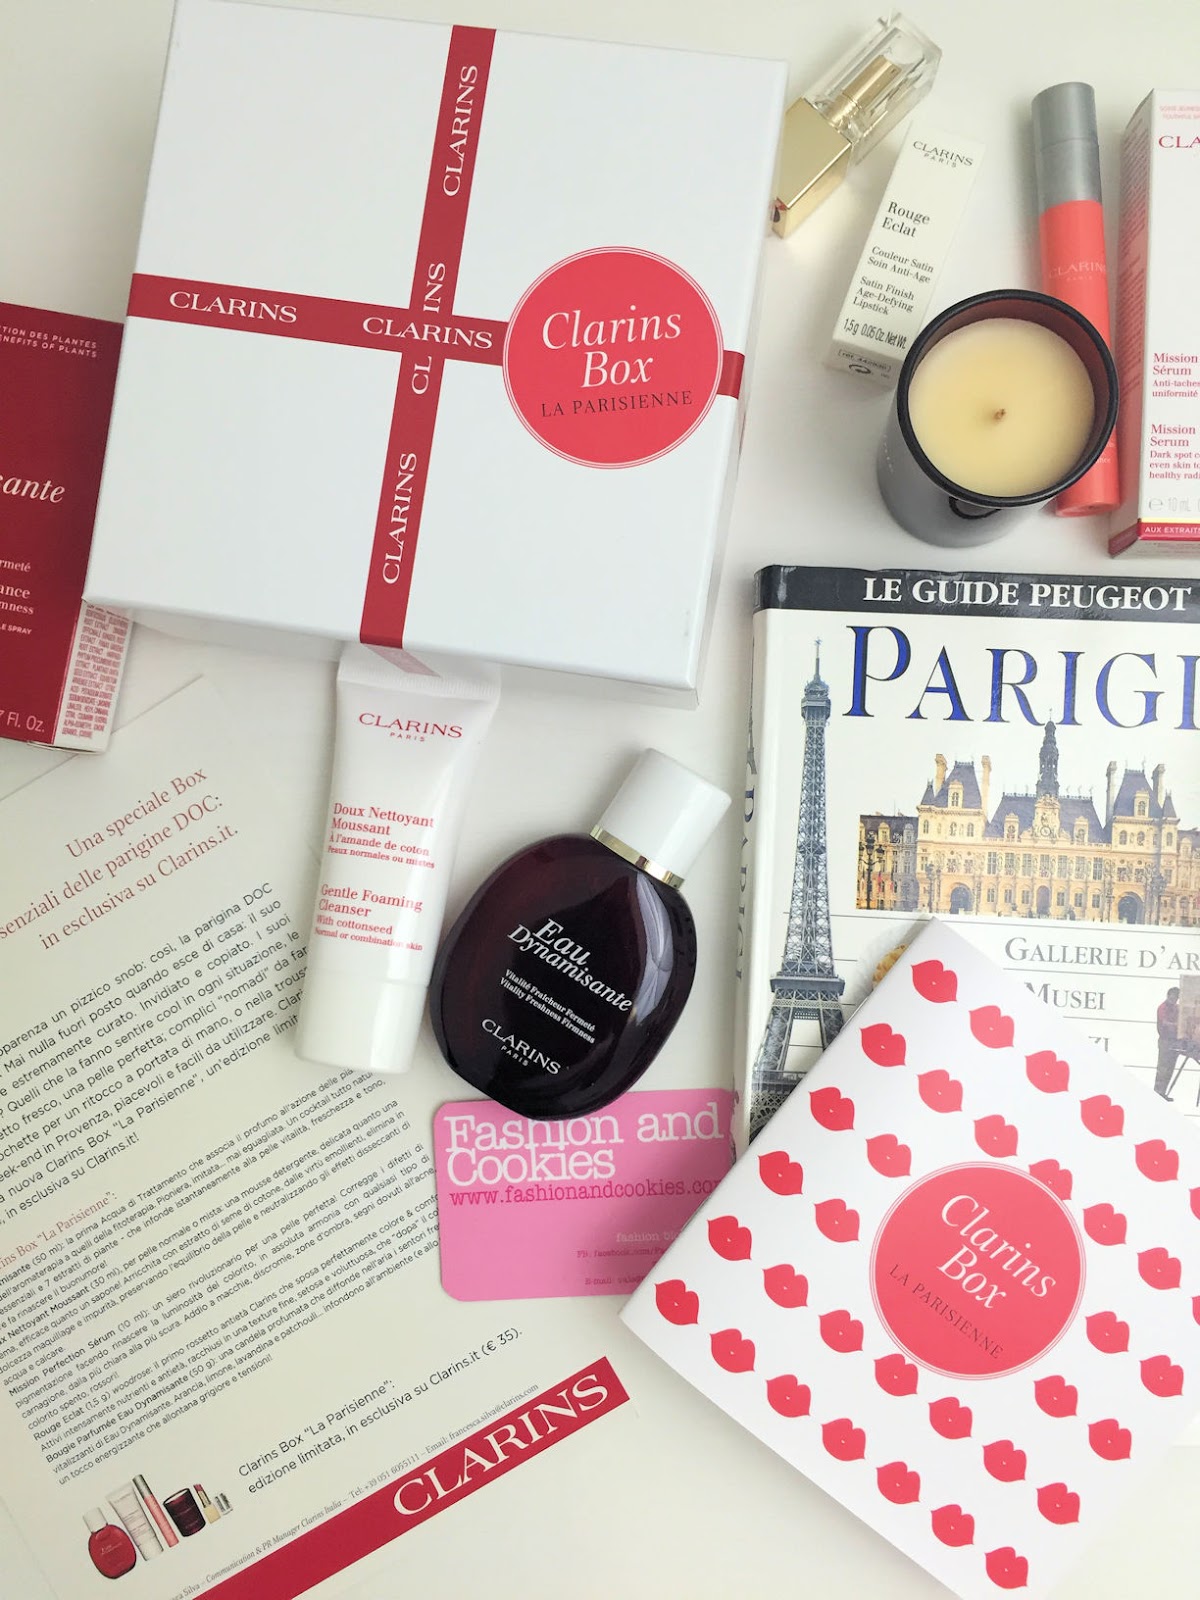 Clarins box La Parisienne on Fashion and Cookies beauty blog, beauty blogger